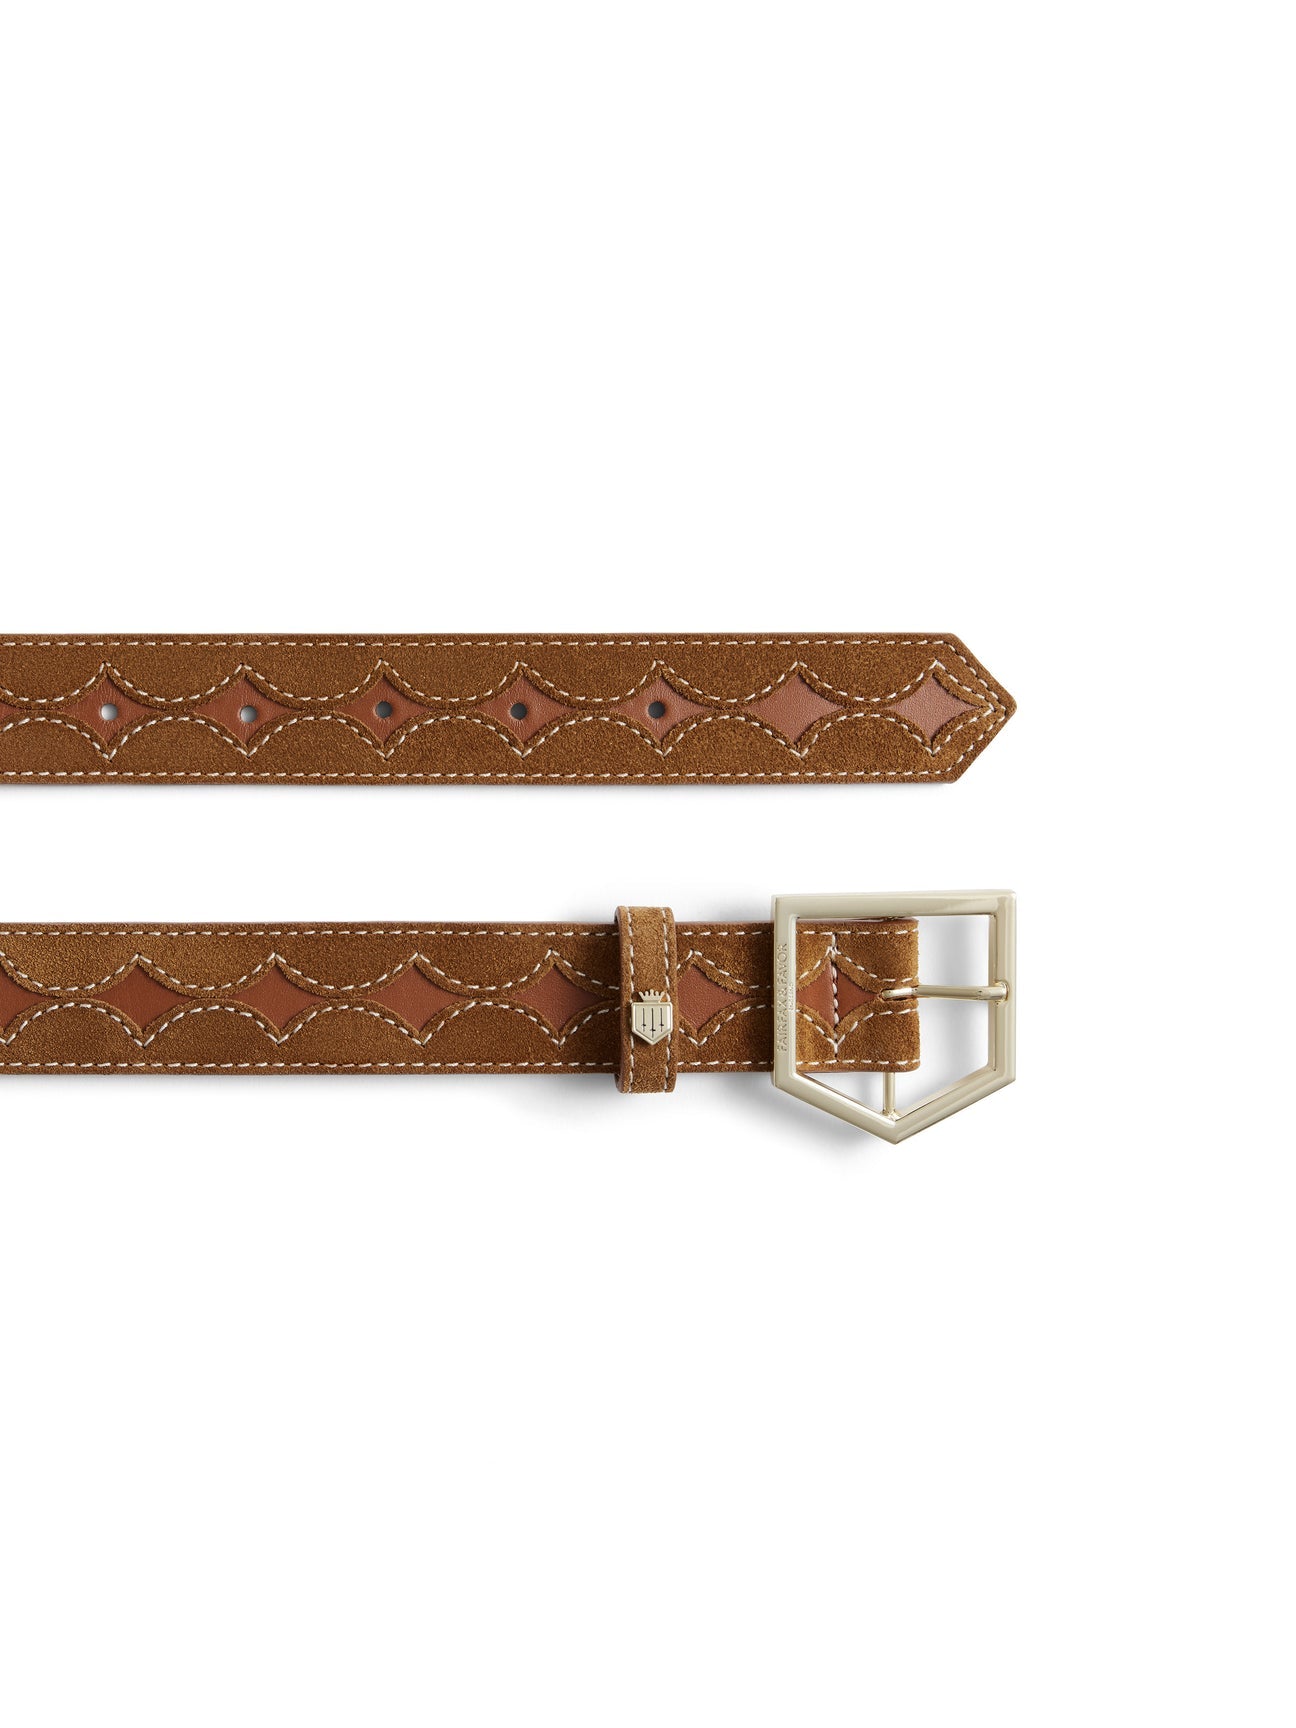 The Ohio
Women's Belt - Tan Suede & Leather